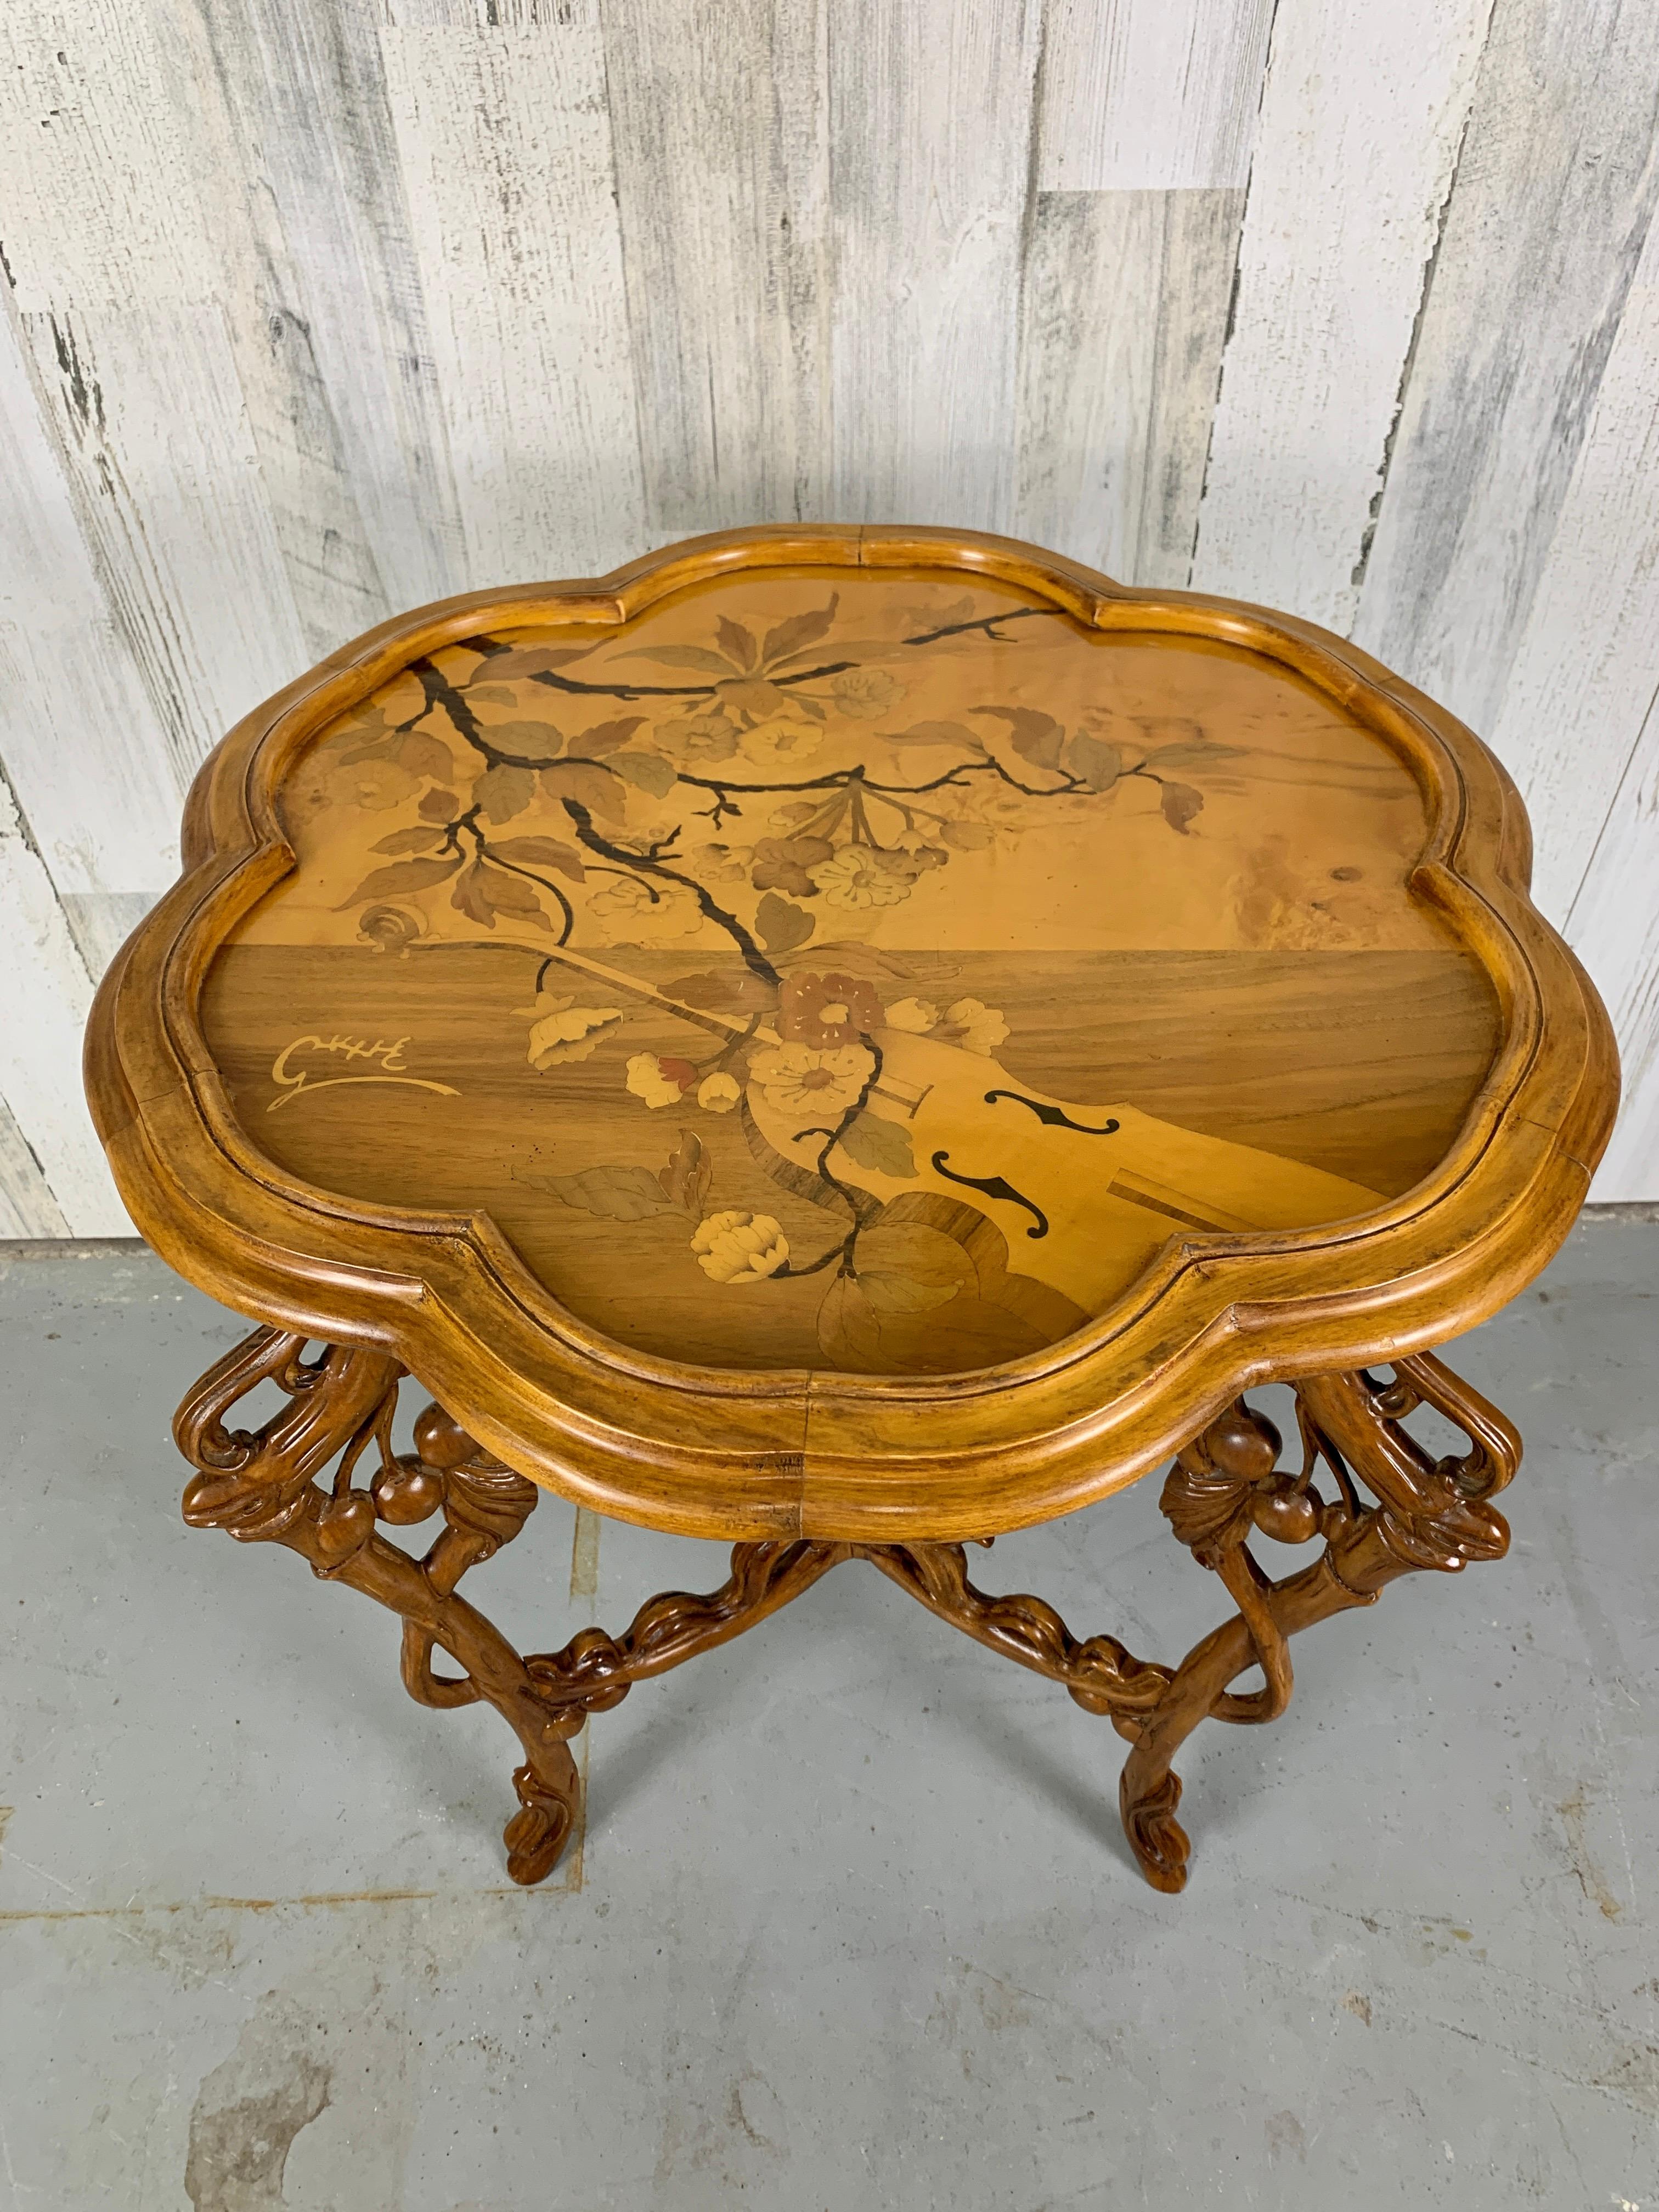 Art Nouveau table in carved walnut with floral and musical motive marquetry.